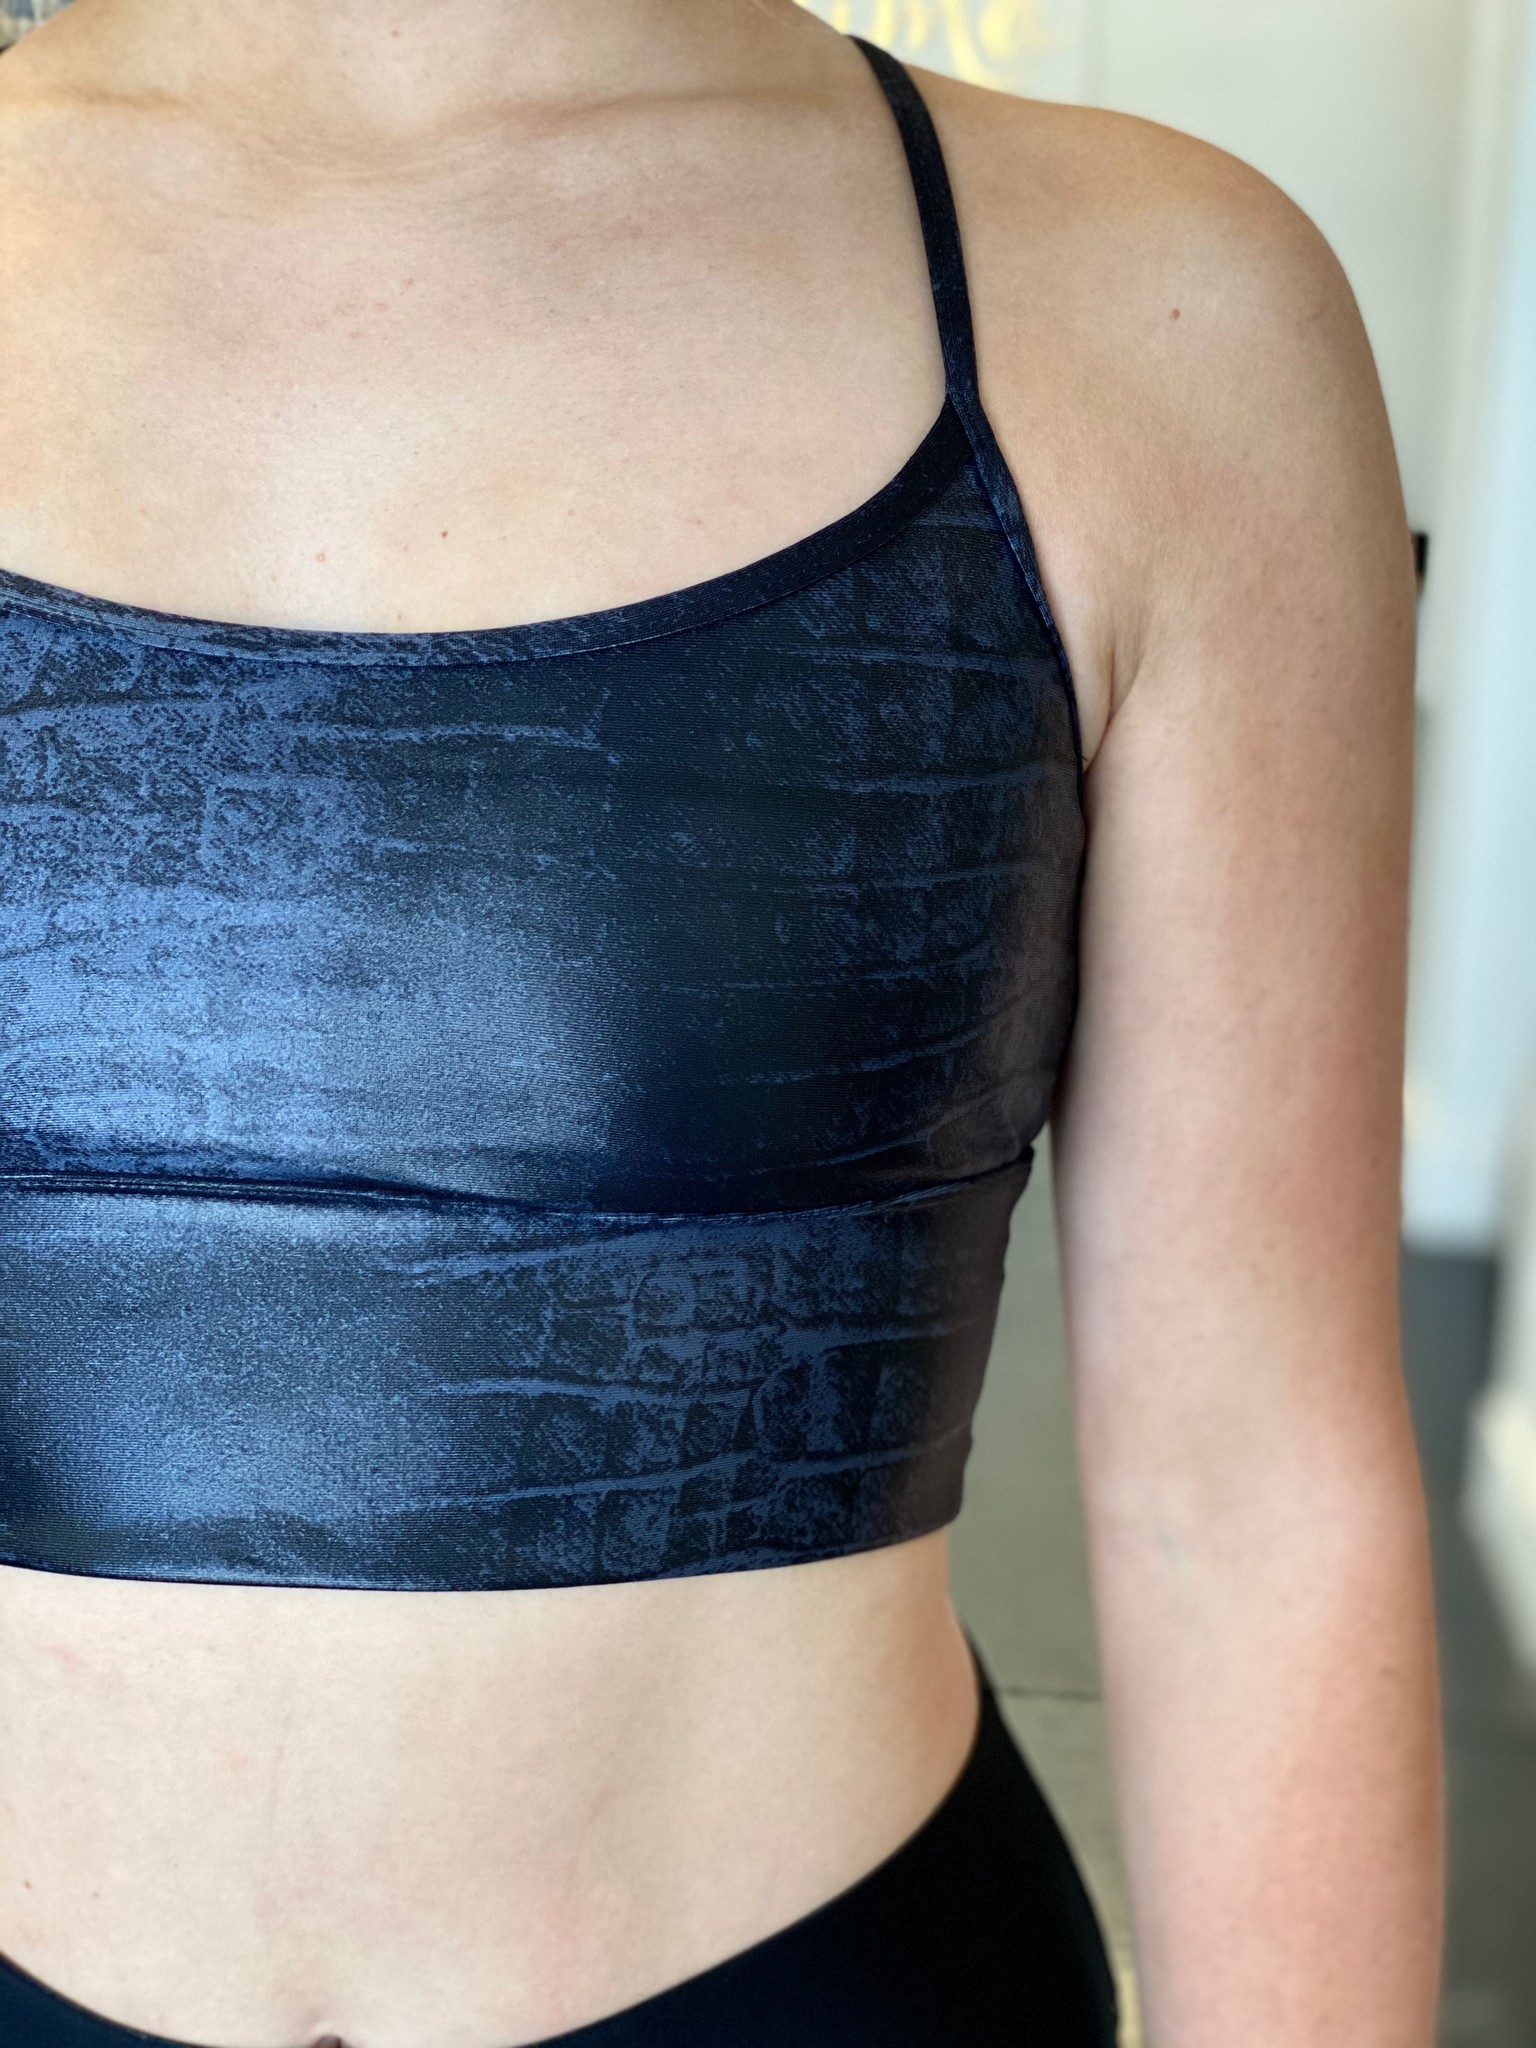 A Summer Set: Koral Start High Rise Infinity Short and Bruna Infinity Sports  Bra, Koral Activewear Is Flattering, Statement-Making, and 35% Off  Sitewide Today!